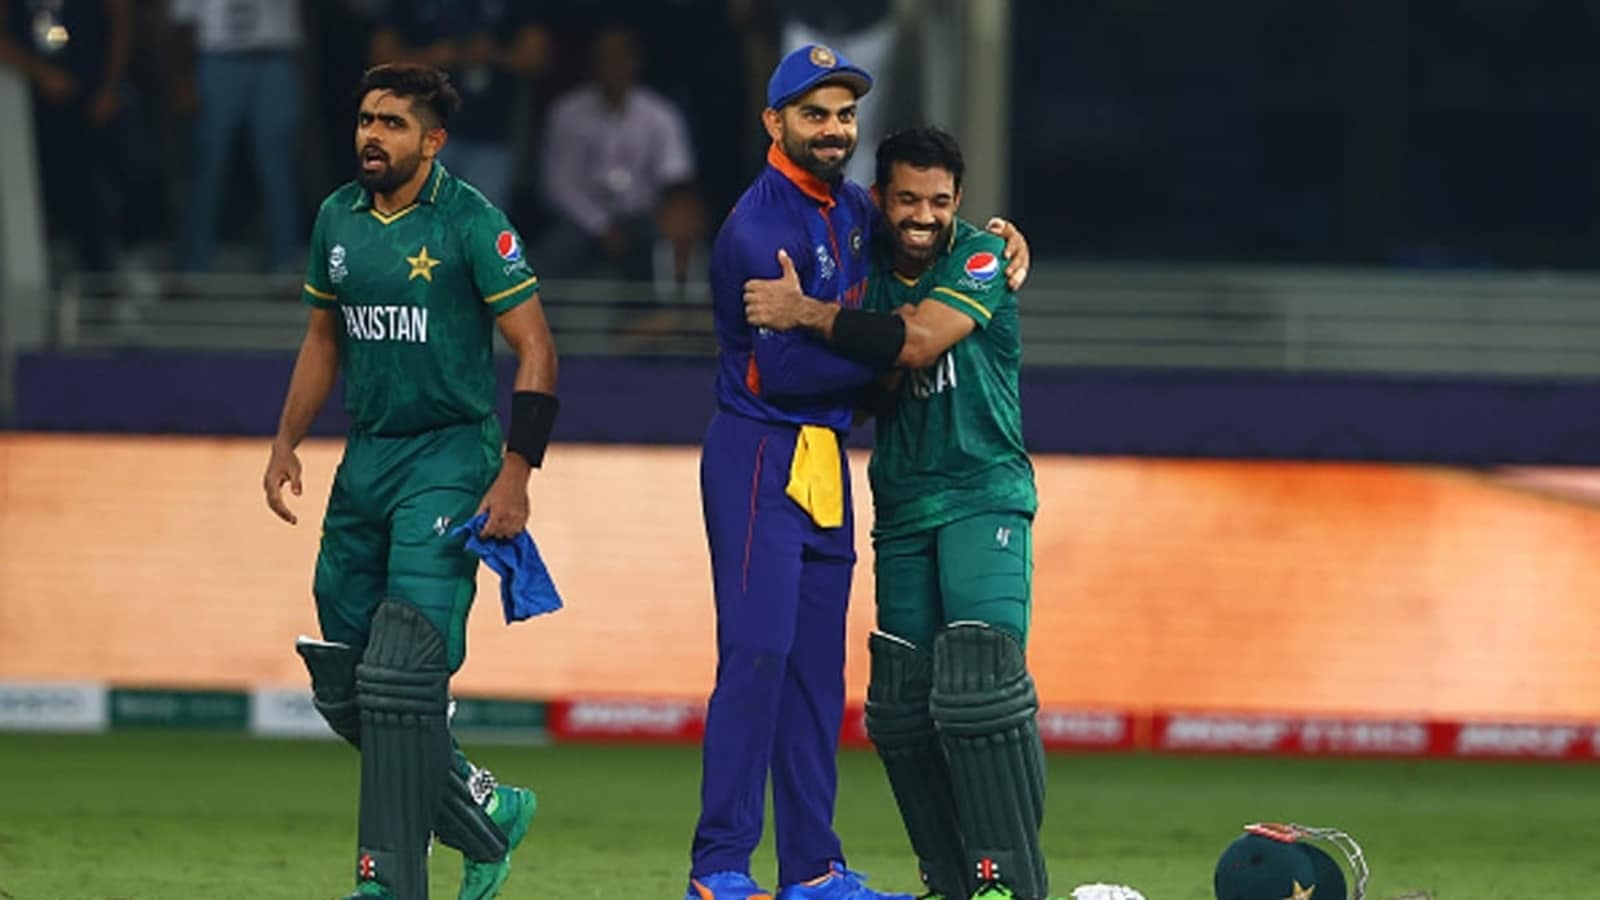 Asia Cup 2022: Virat Kohli becomes batter with highest average in T20I cricket, overtakes Pakistan's Mohammad Rizwan